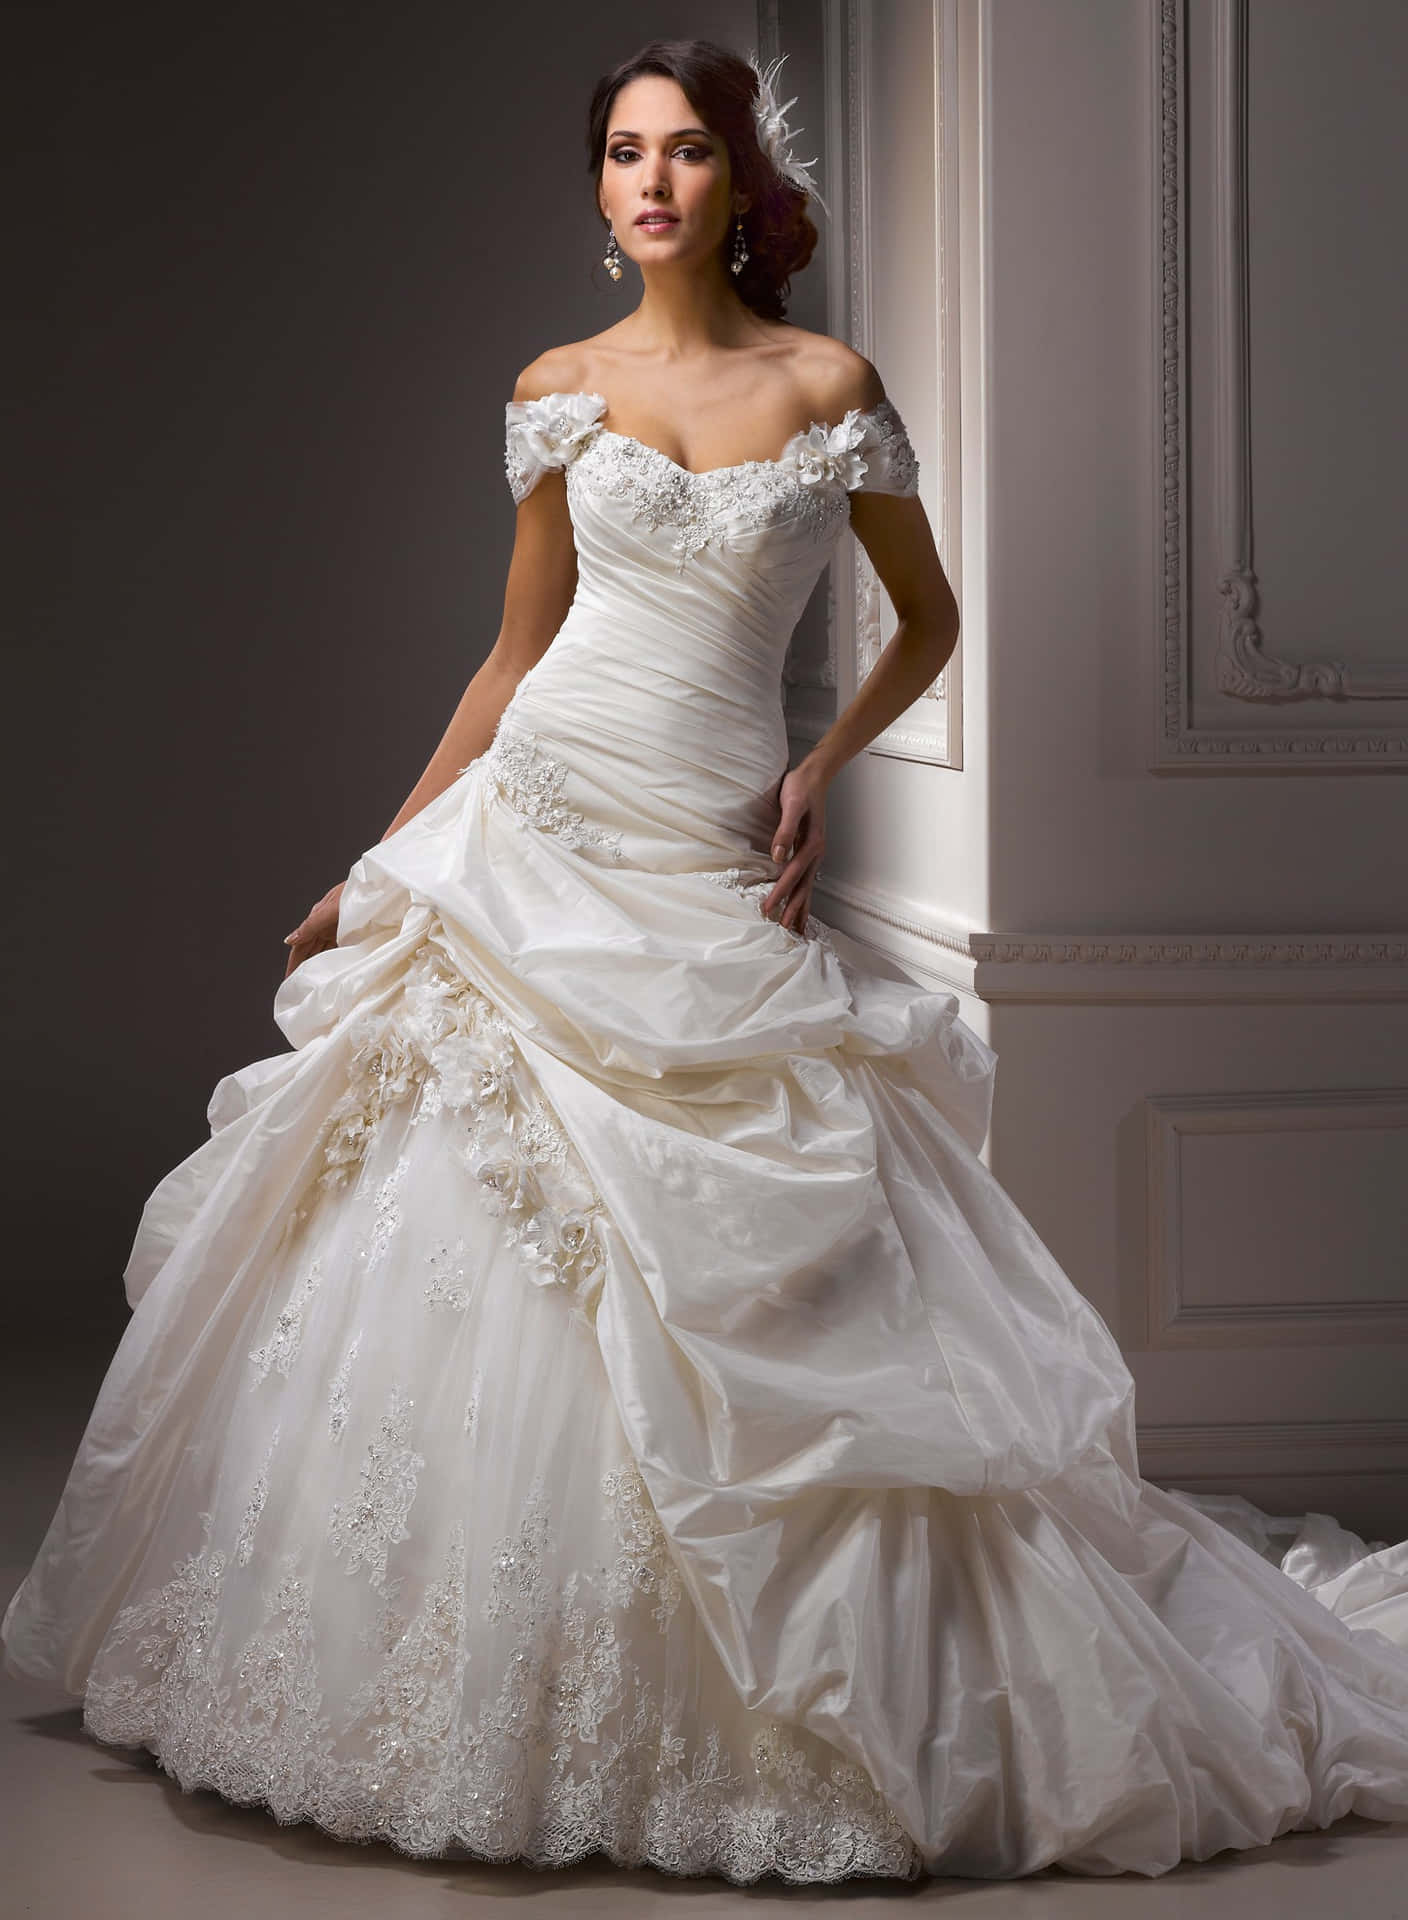 Delicate and Beautiful Wedding Gown with Elegant Embroidery